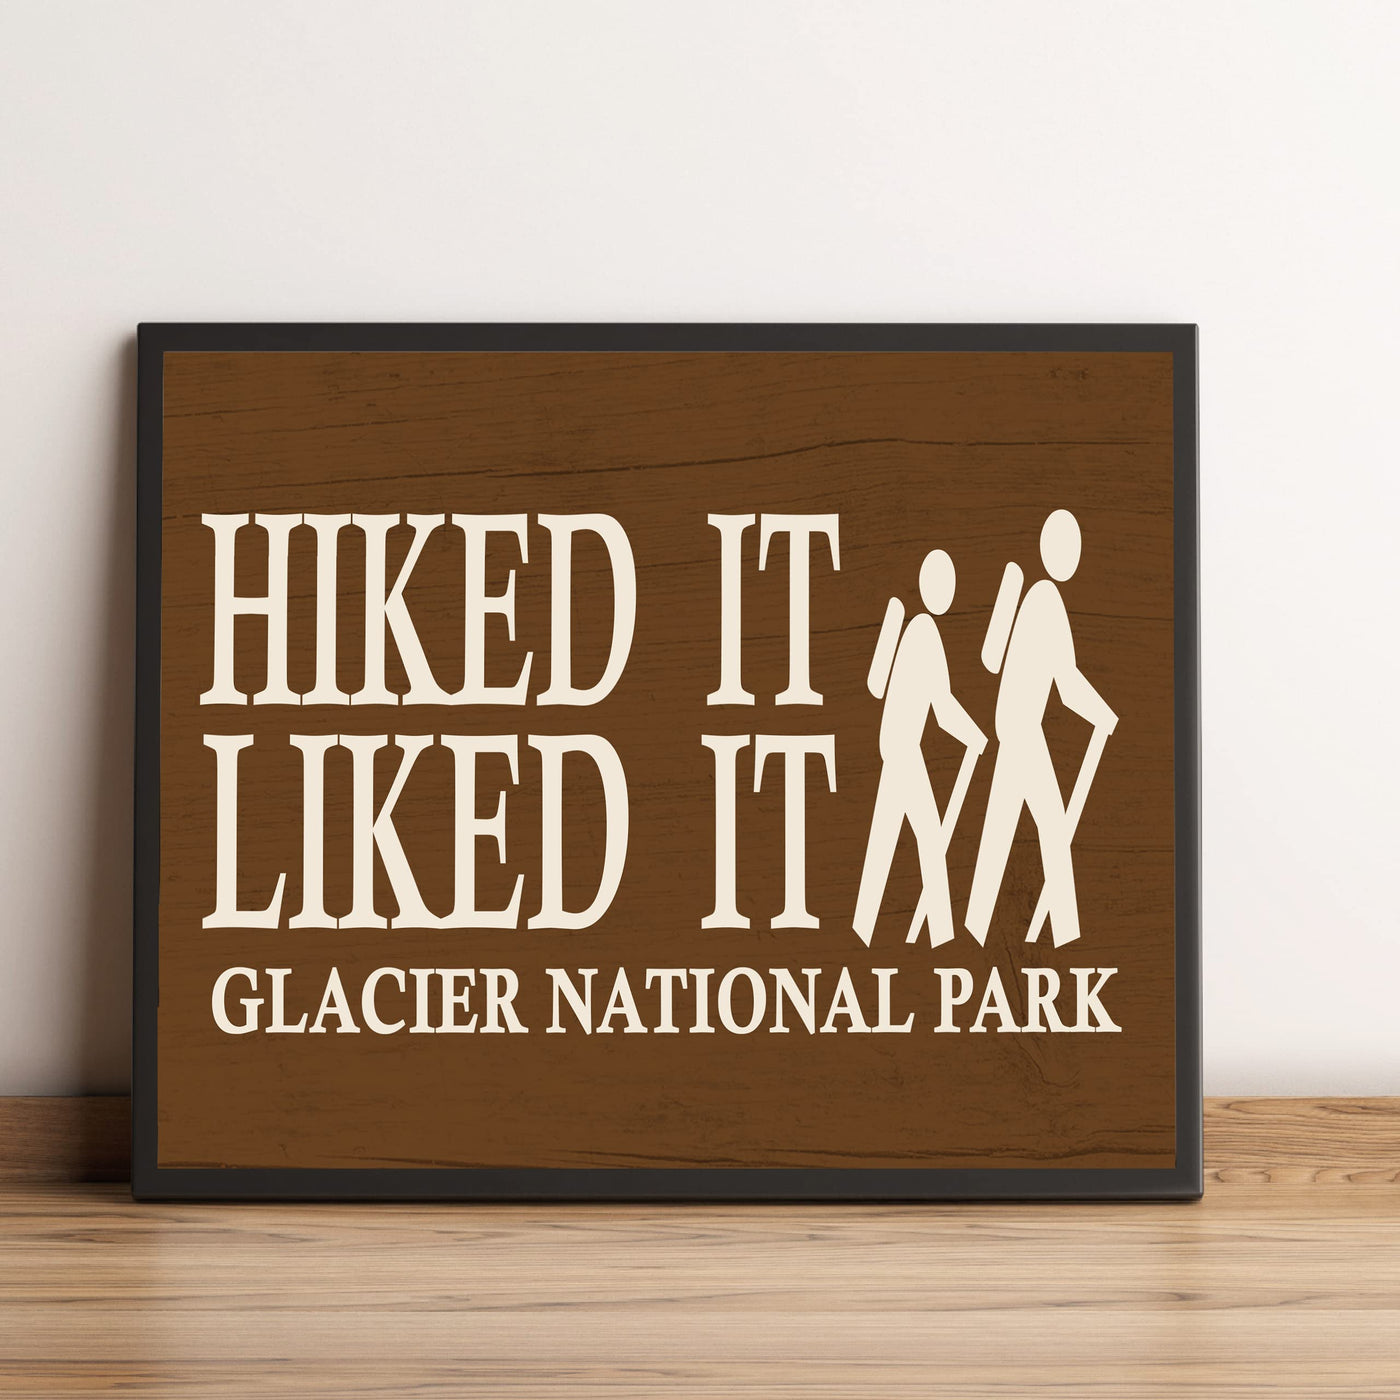 Glacier National Park-Hiked It, Liked It-Rustic Wall Decor Print- 10 x 8" Funny Outdoors Print-Ready to Frame. Replica Distressed Wood Design for Home-Cabin-Deck-Lodge-Lake. Printed on Photo Paper.